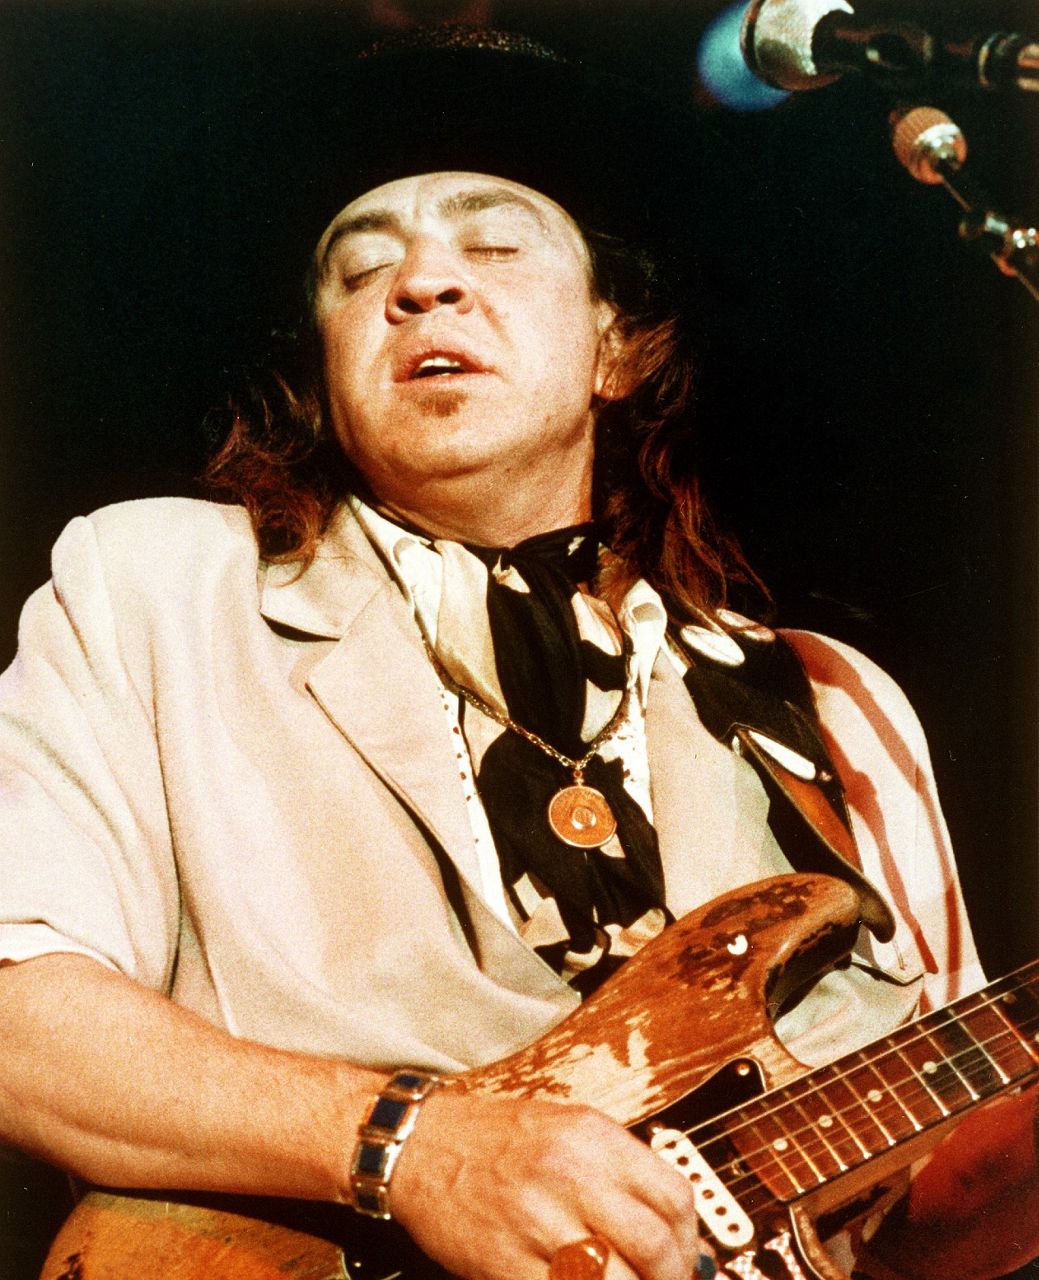 Blues guitarist Stevie Ray Vaughan is seen performing onstage at the Rhythm and Blues Foundation Benefit in Austin, Texas, in this 1988 photo. (AP Photo/Lisa Davis)